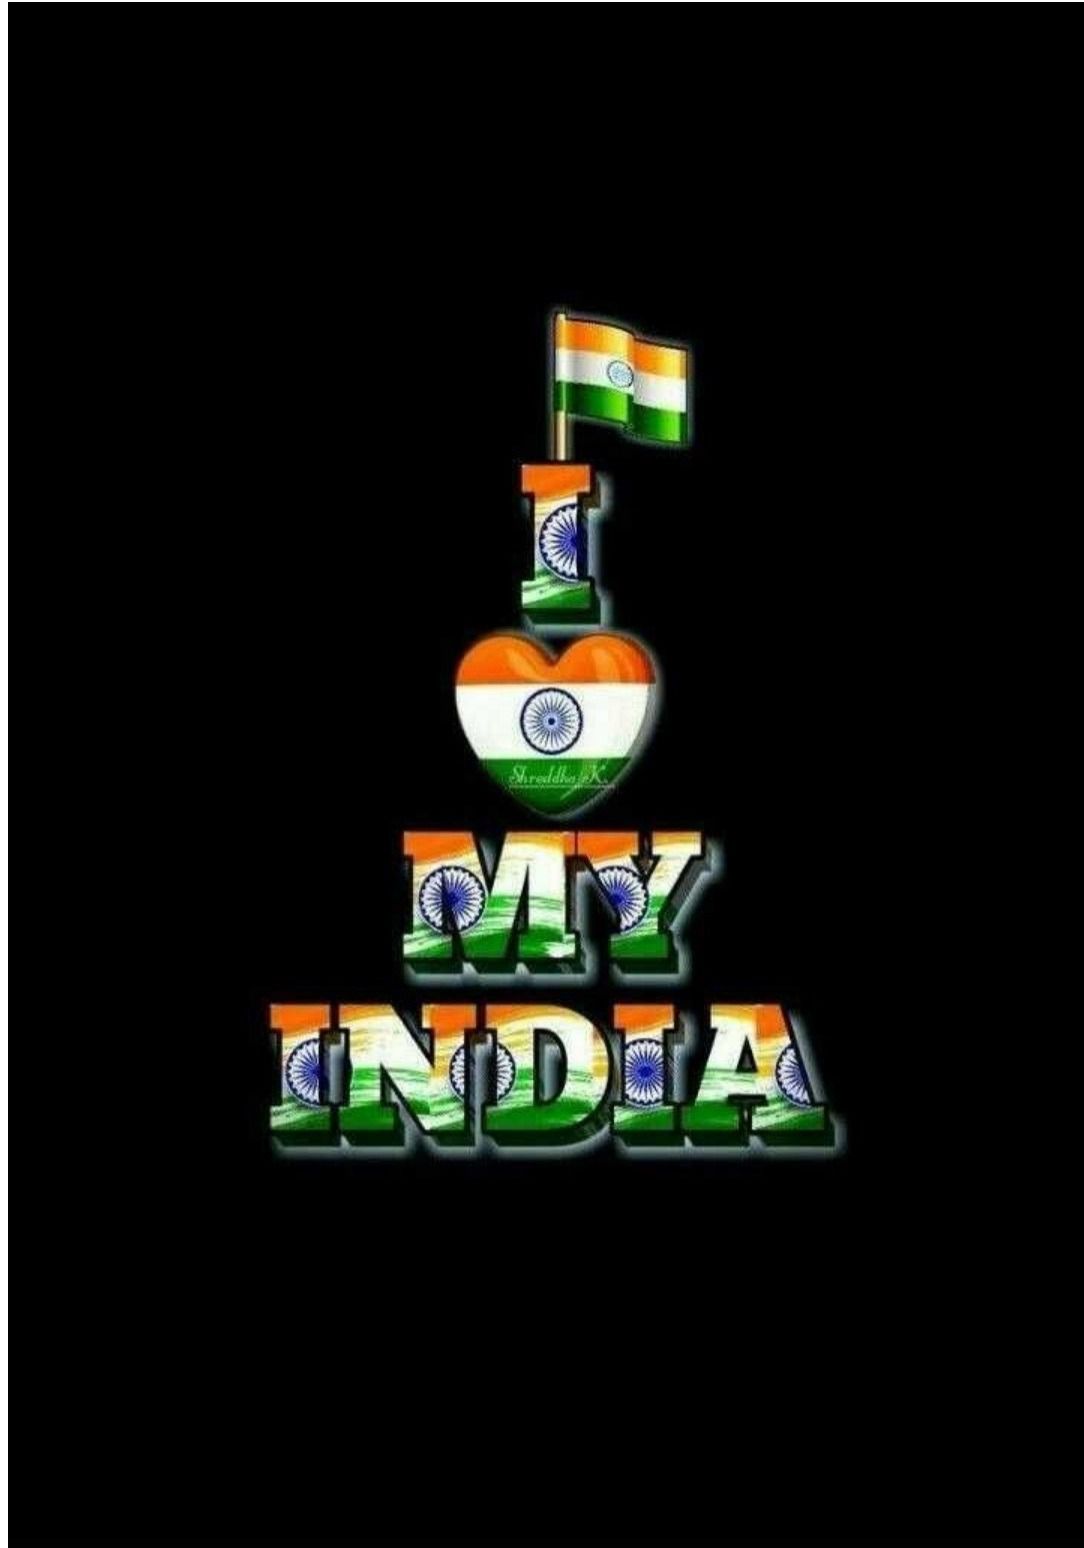 Independence Day (15 August) Brilliant Image 2020. Indian flag wallpaper, Indian flag colors, Indian flag pic